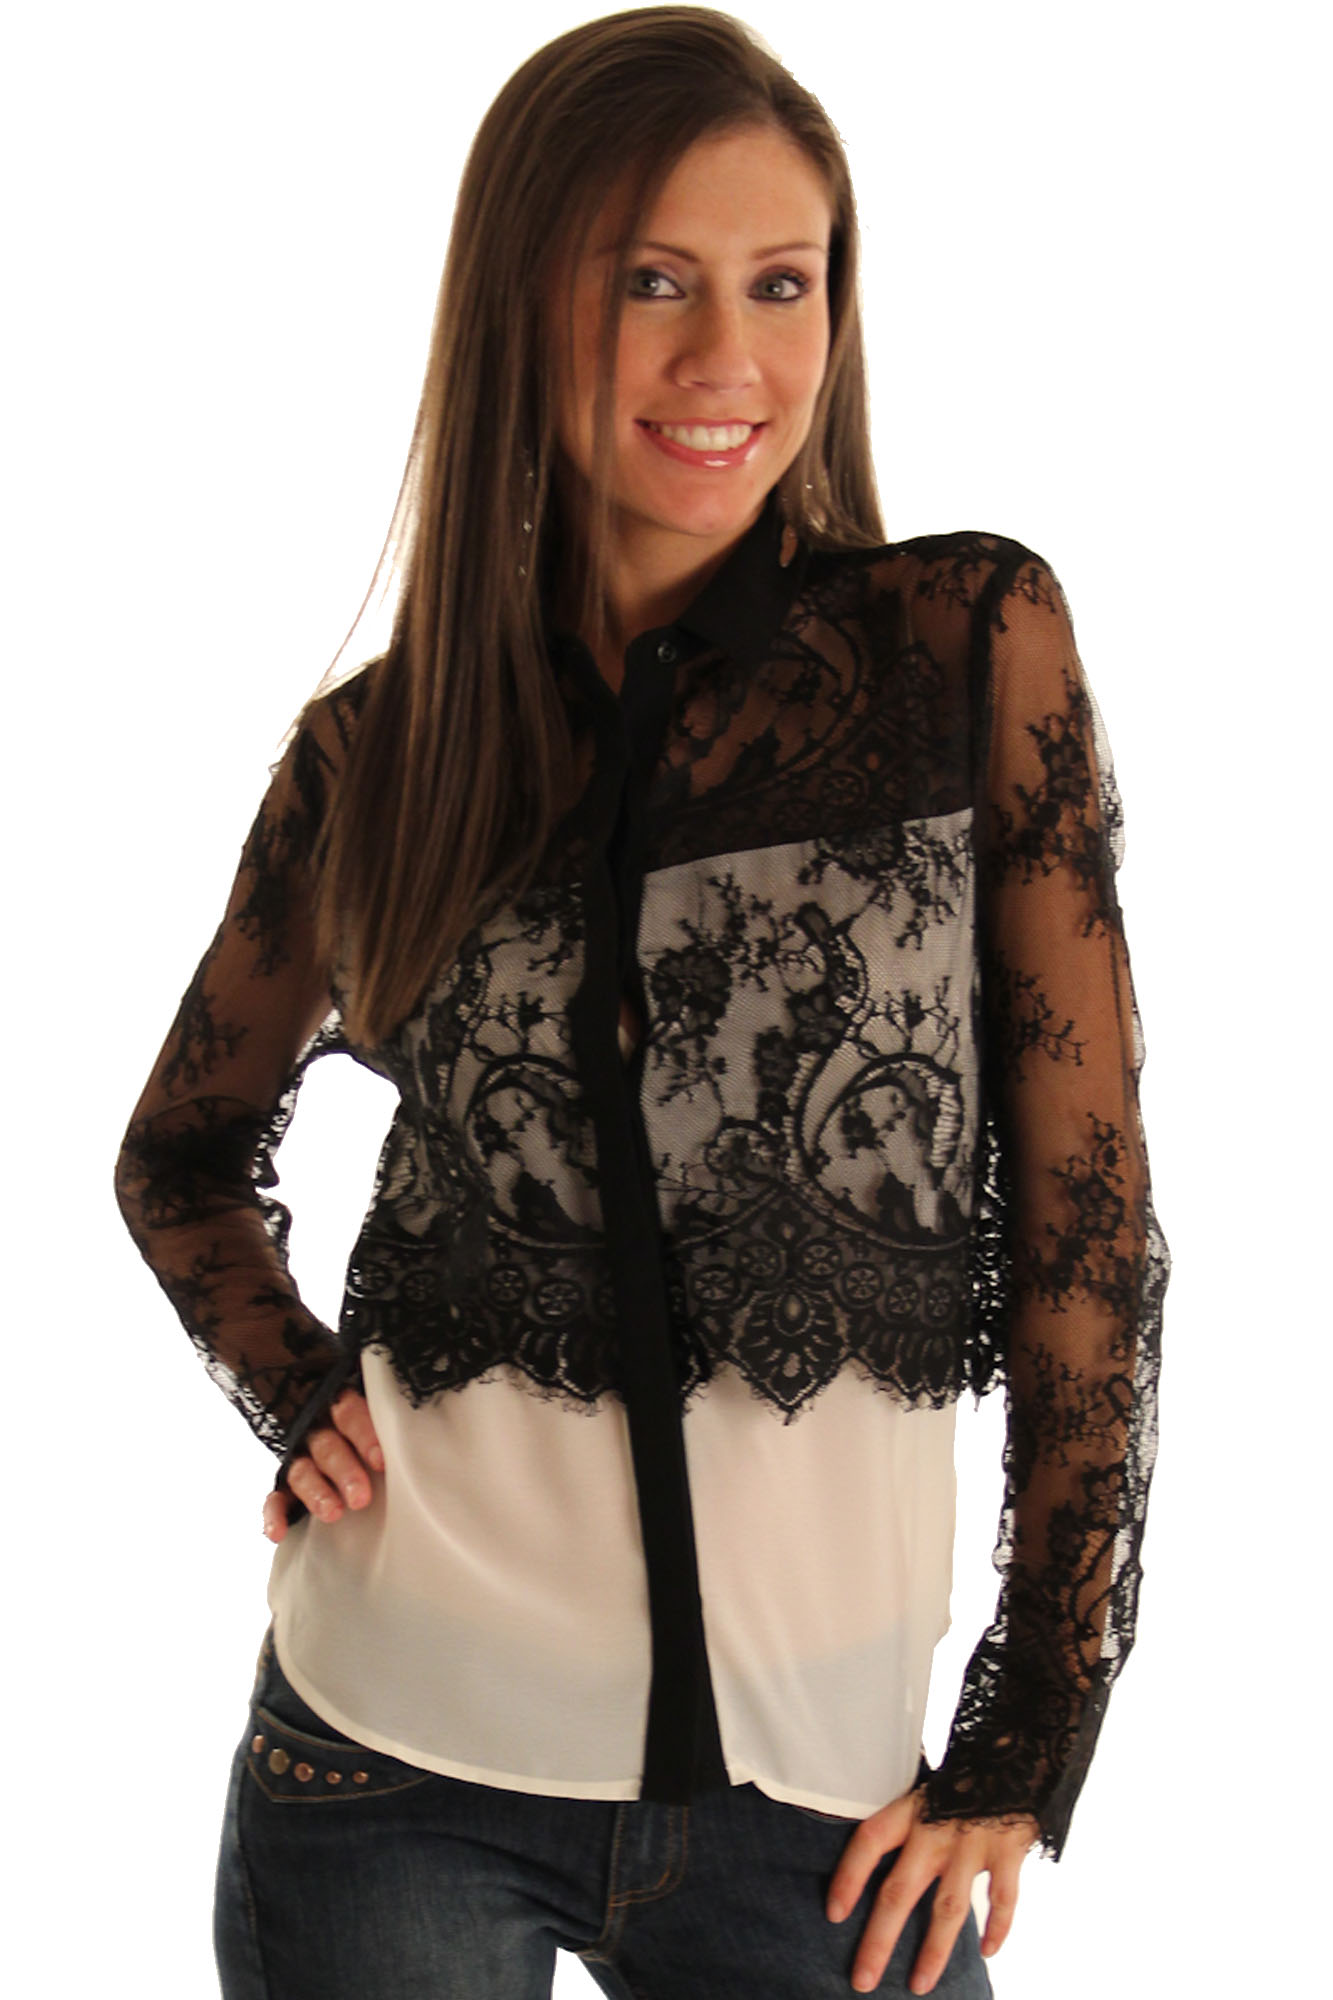 DHStyles.com DHStyles Women's Black Romantic Sheer Lace Long Sleeve Top - Small